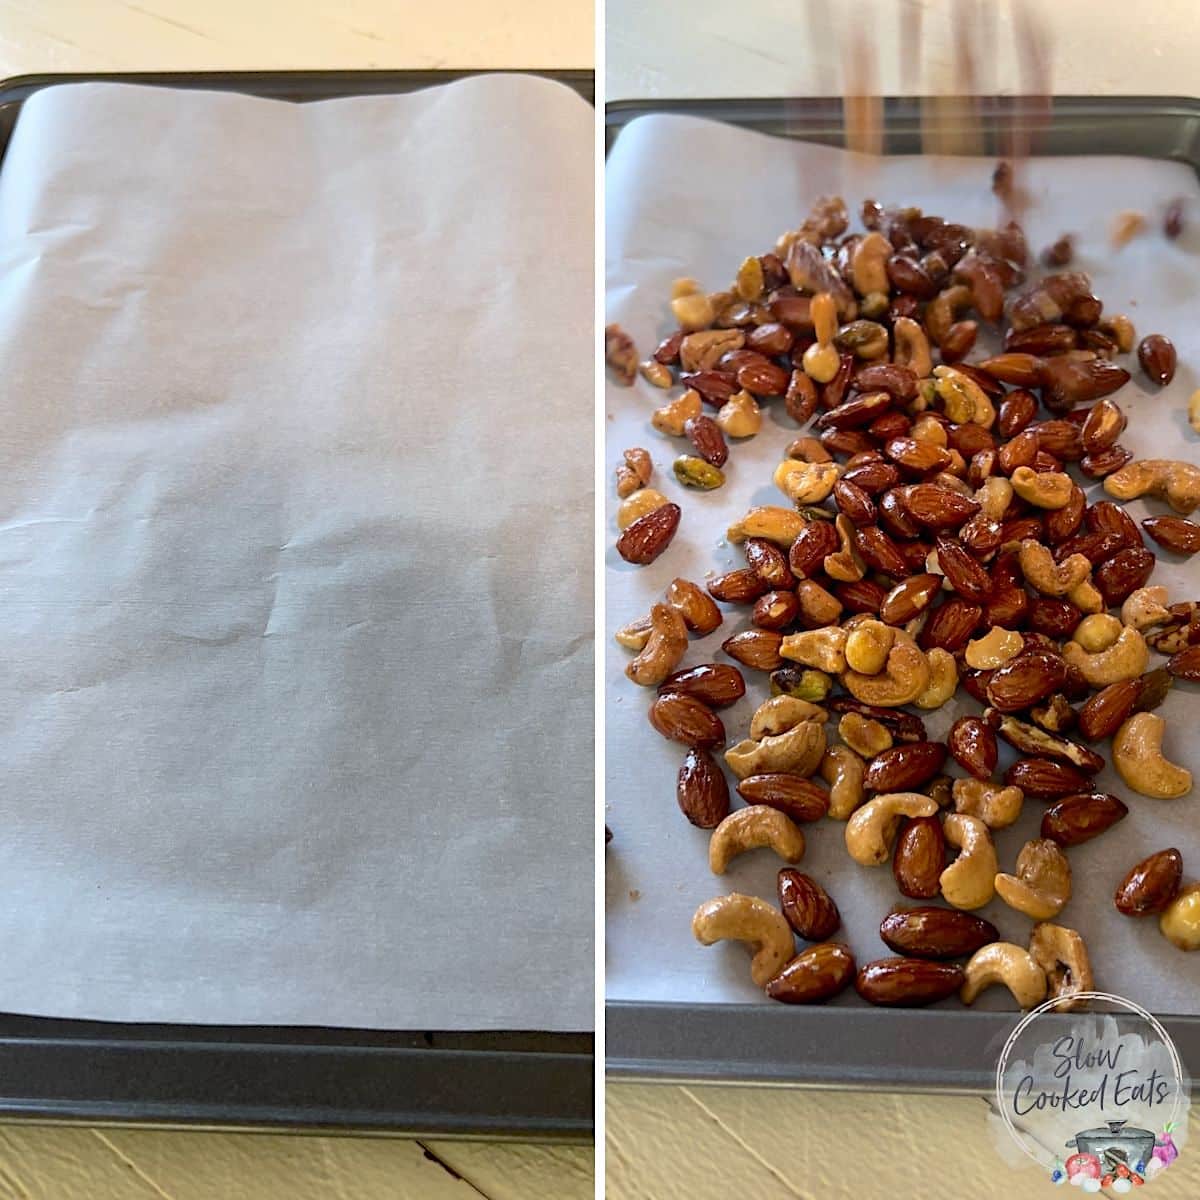 Pouring the slow cooked candied nuts on to a baking sheet to cool.